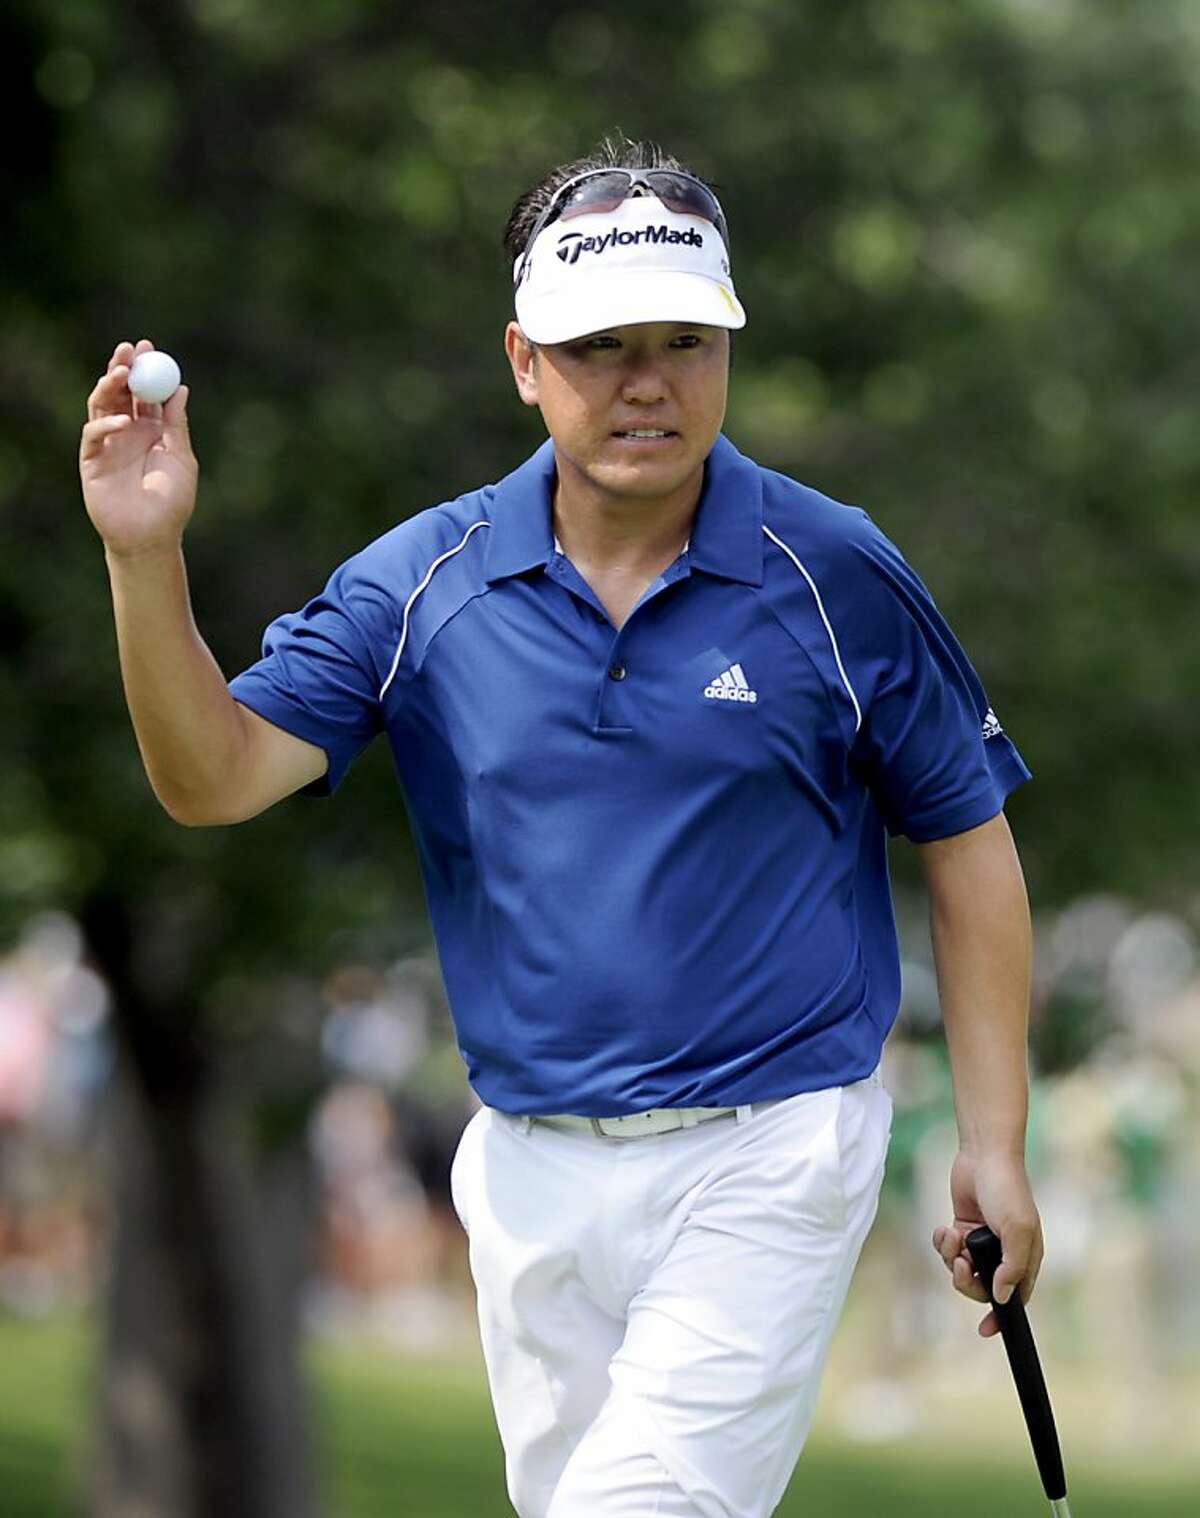 Charlie Wi, of South Korea, waves to the crowd after making a par on the 14th hole during the third round of play at the Colonial golf tournament in Fort Worth, Texas, Saturday, May 21, 2011.